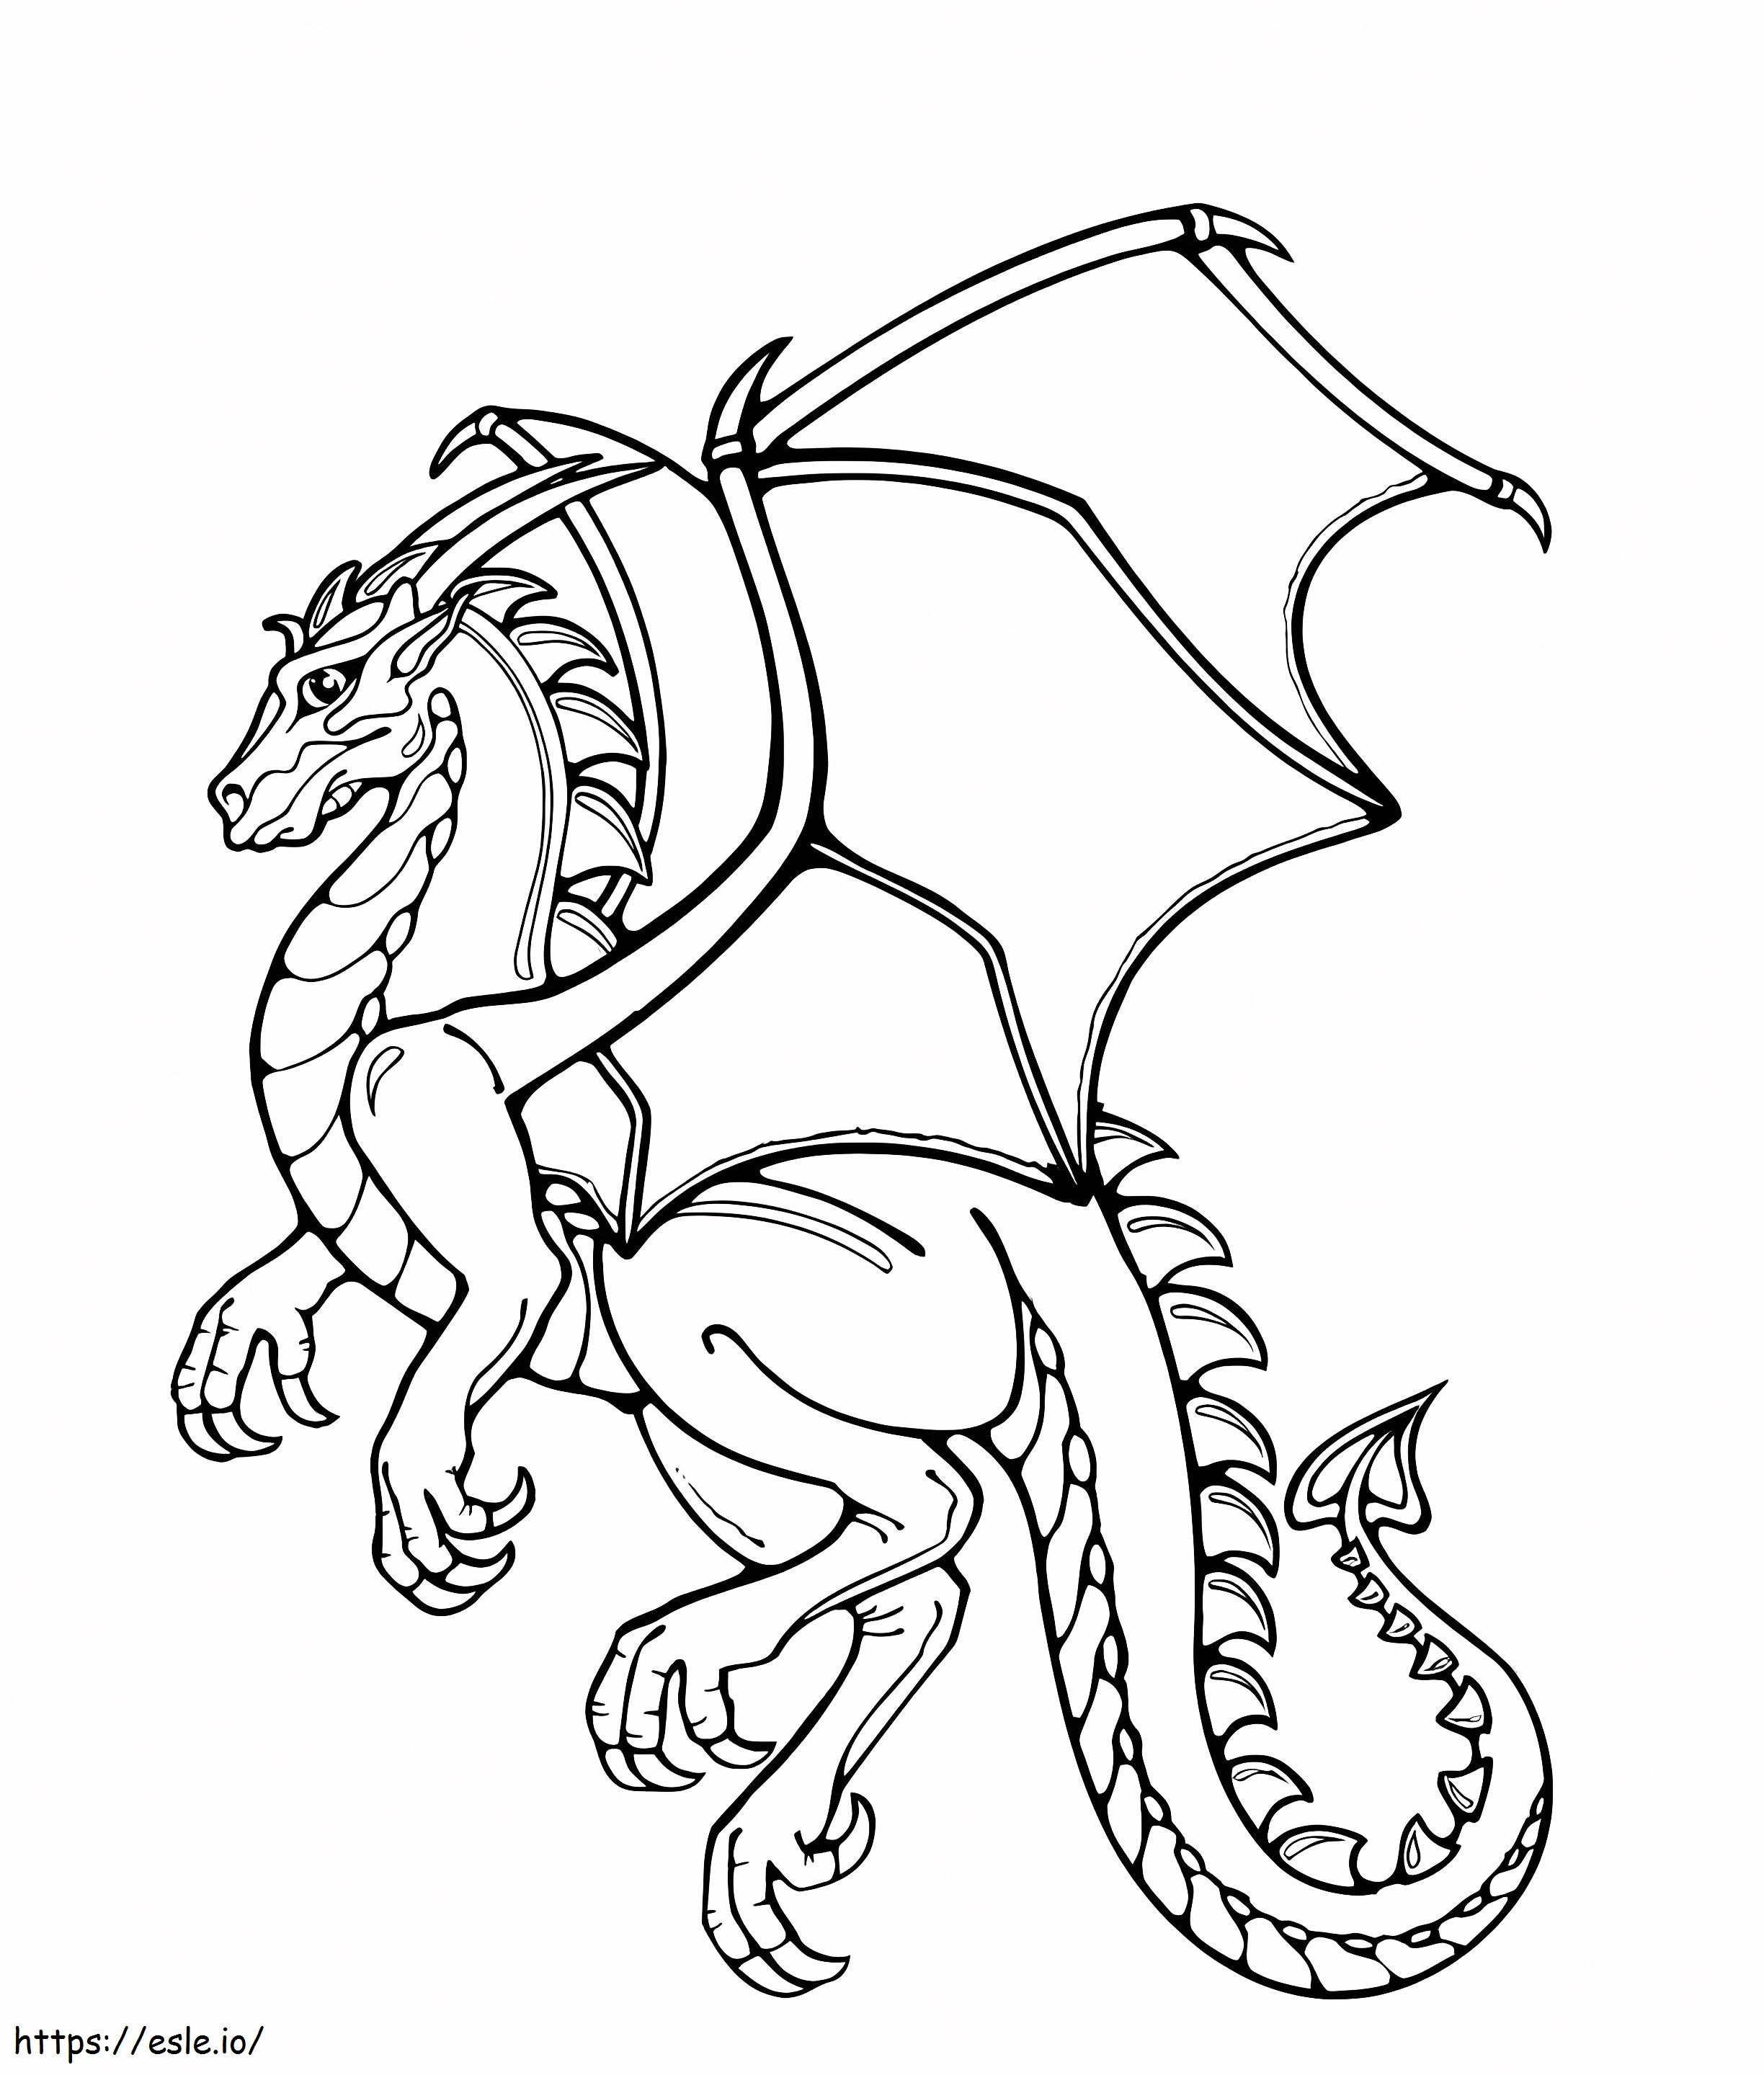 Flying Dragon coloring page